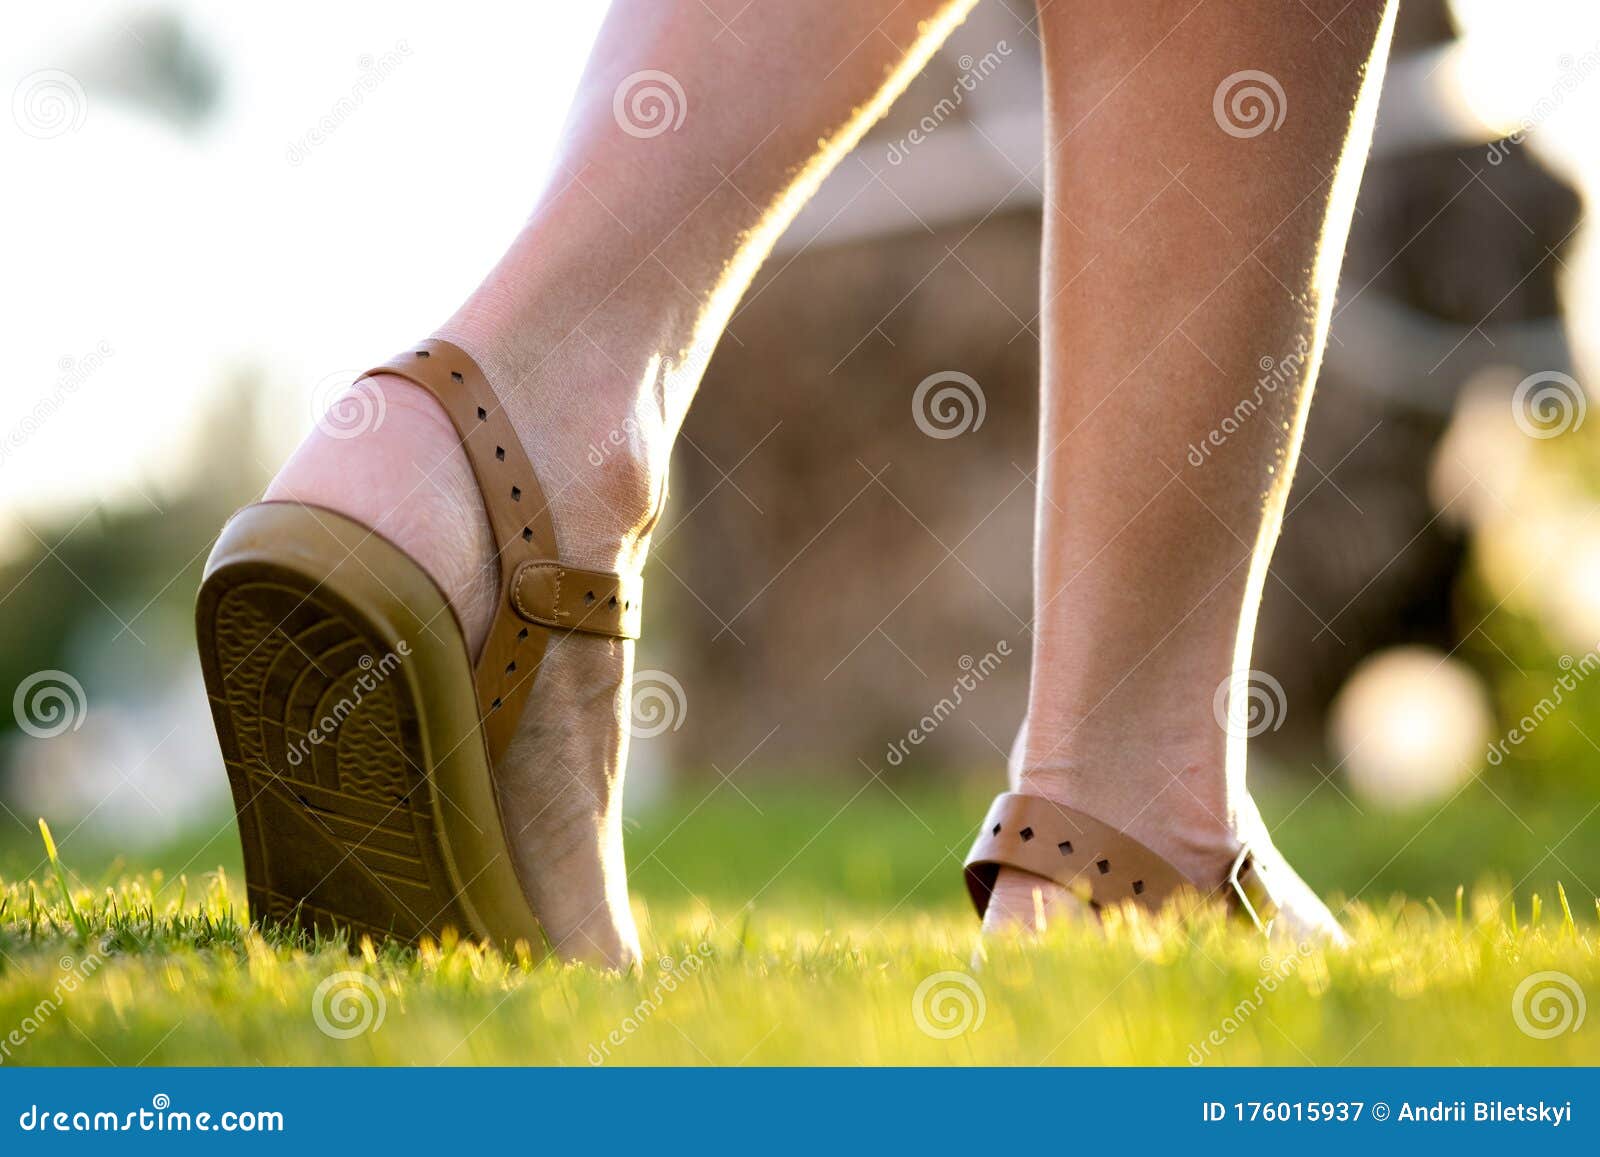 Close Up of Woman Feet in Summer Sandals Shoes Walking on Spring Lawn ...